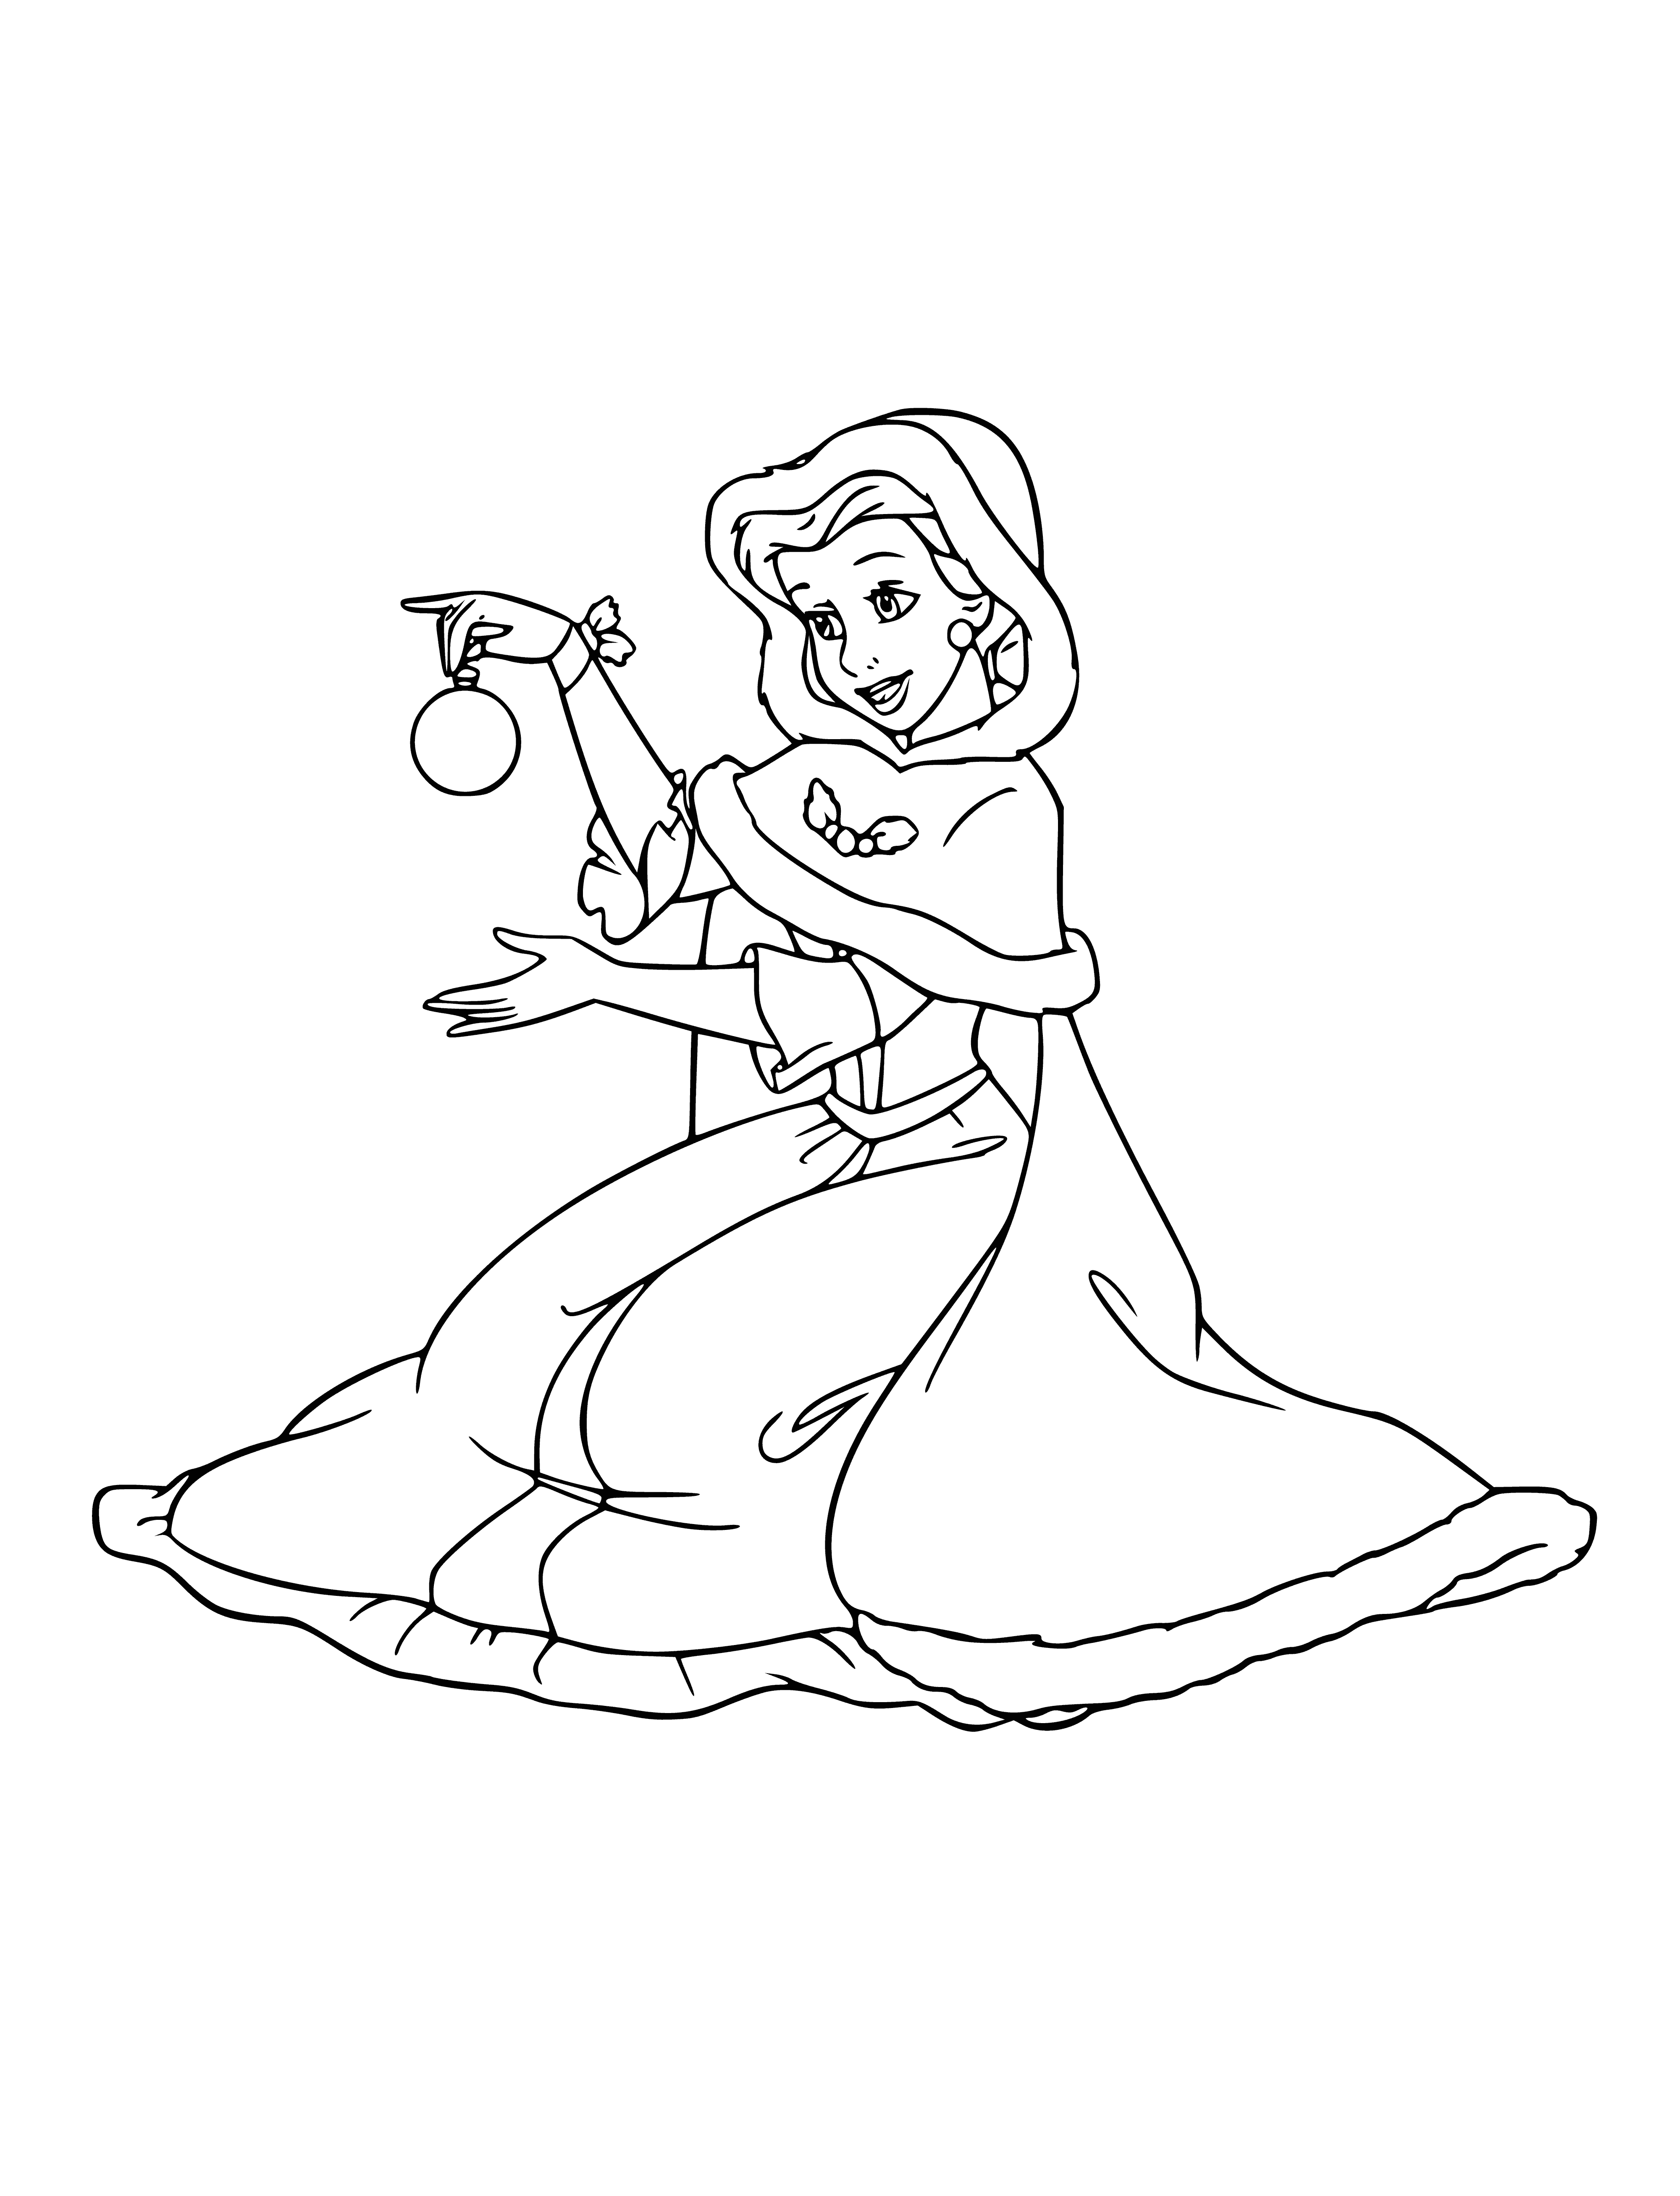 coloring page: Belle stands in the middle as snowflakes fall around the circle of princesses in festive dresses & hair styles. #princessparty